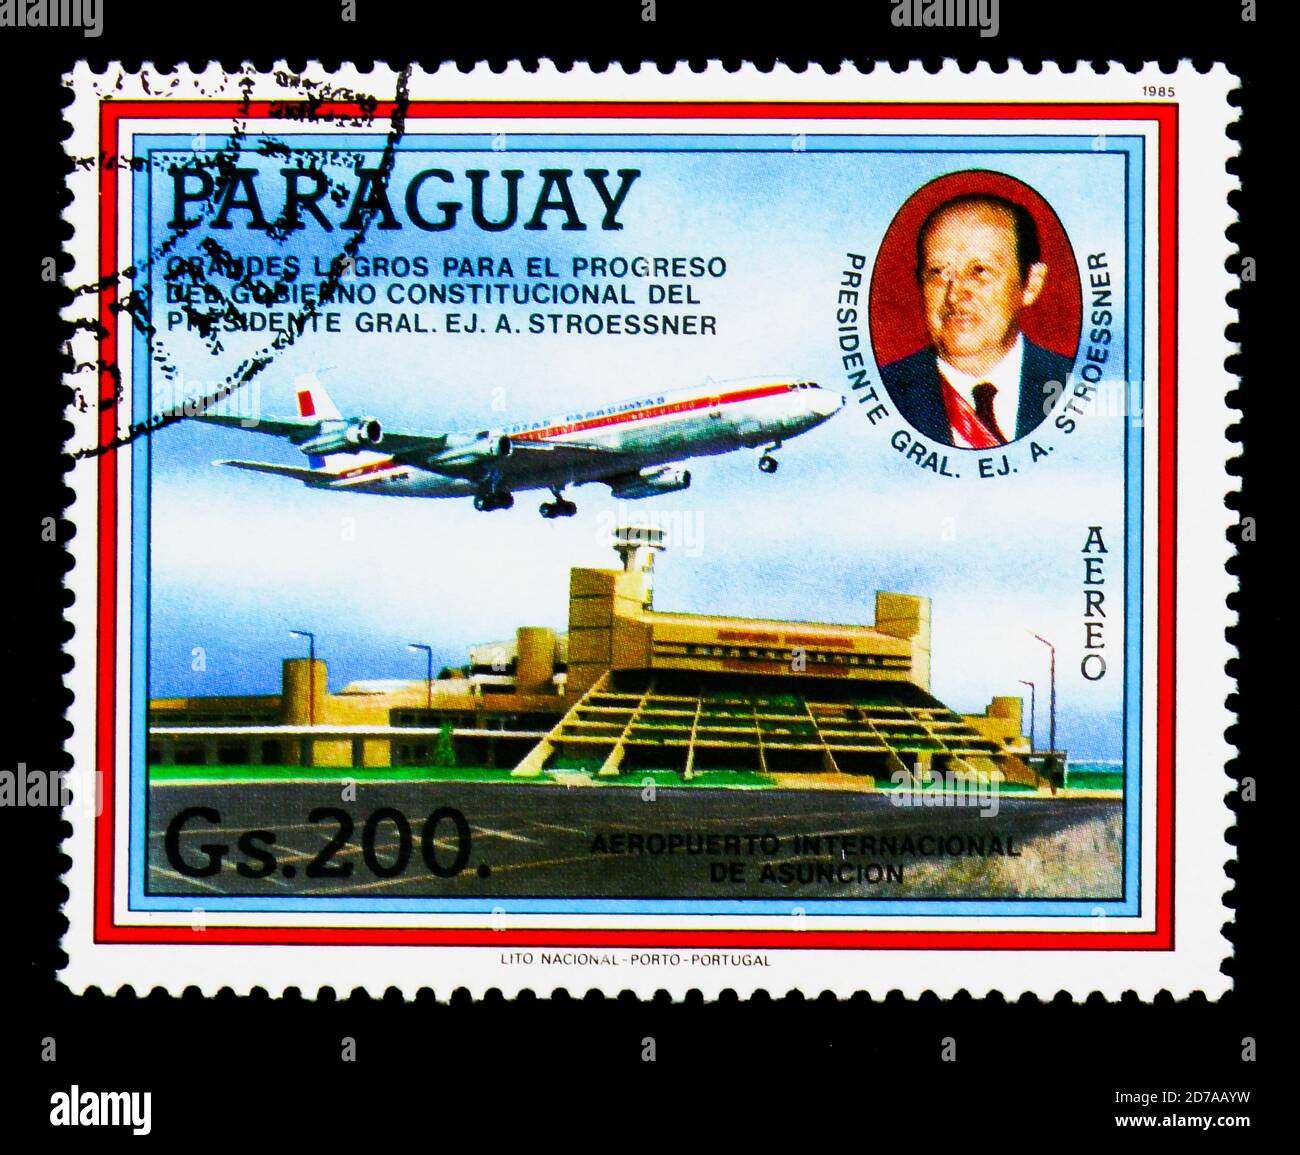 MOSCOW, RUSSIA - NOVEMBER 26, 2017: A stamp printed in Paraguay shows Asuncion International Airport, Development Projects serie, circa 1985 Stock Photo